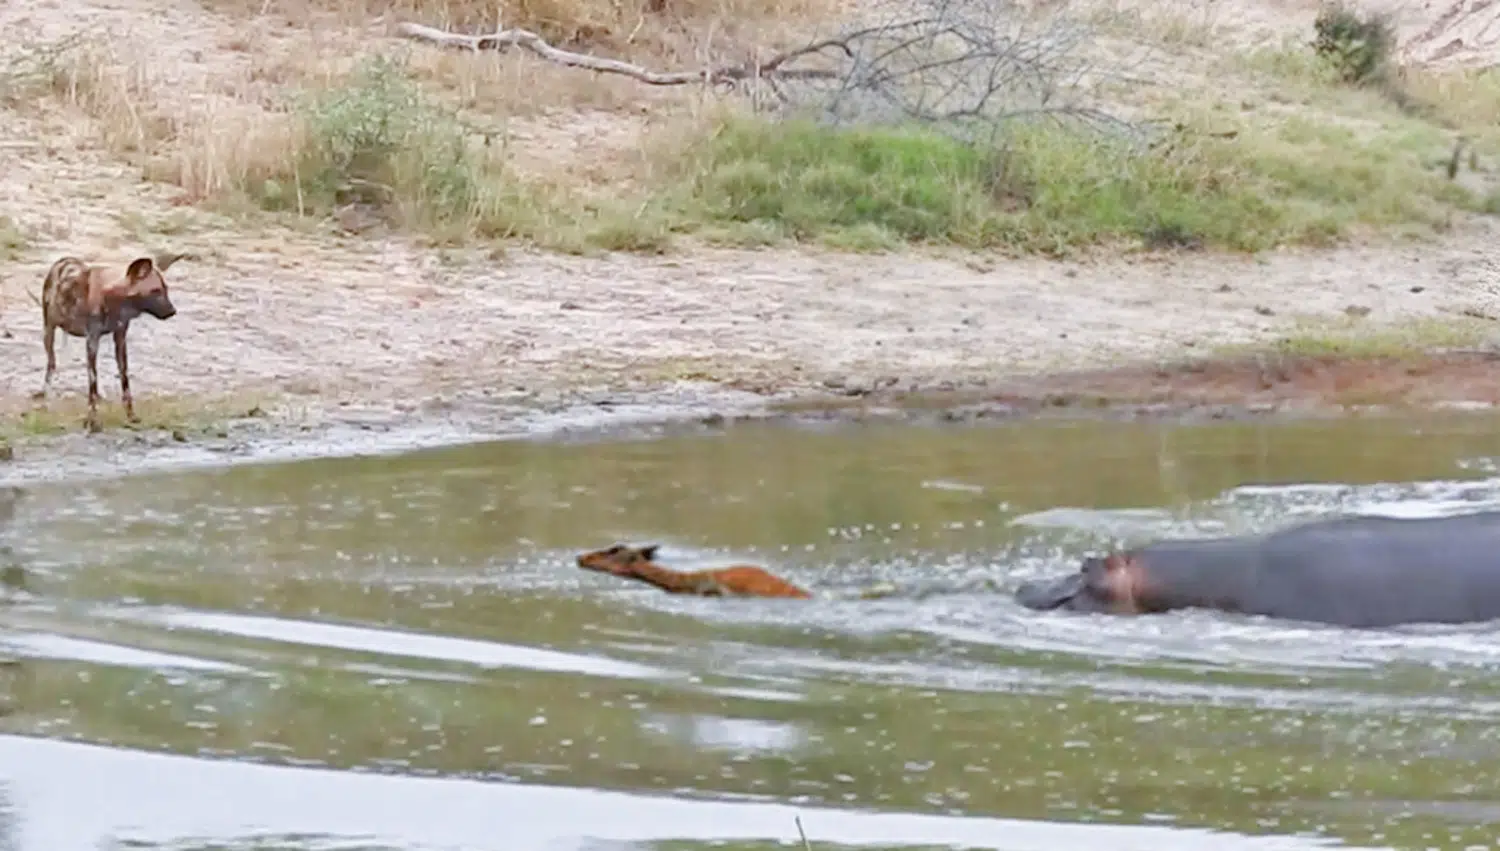 Impala in a Catch-22 Between Hippo and Wild Dog